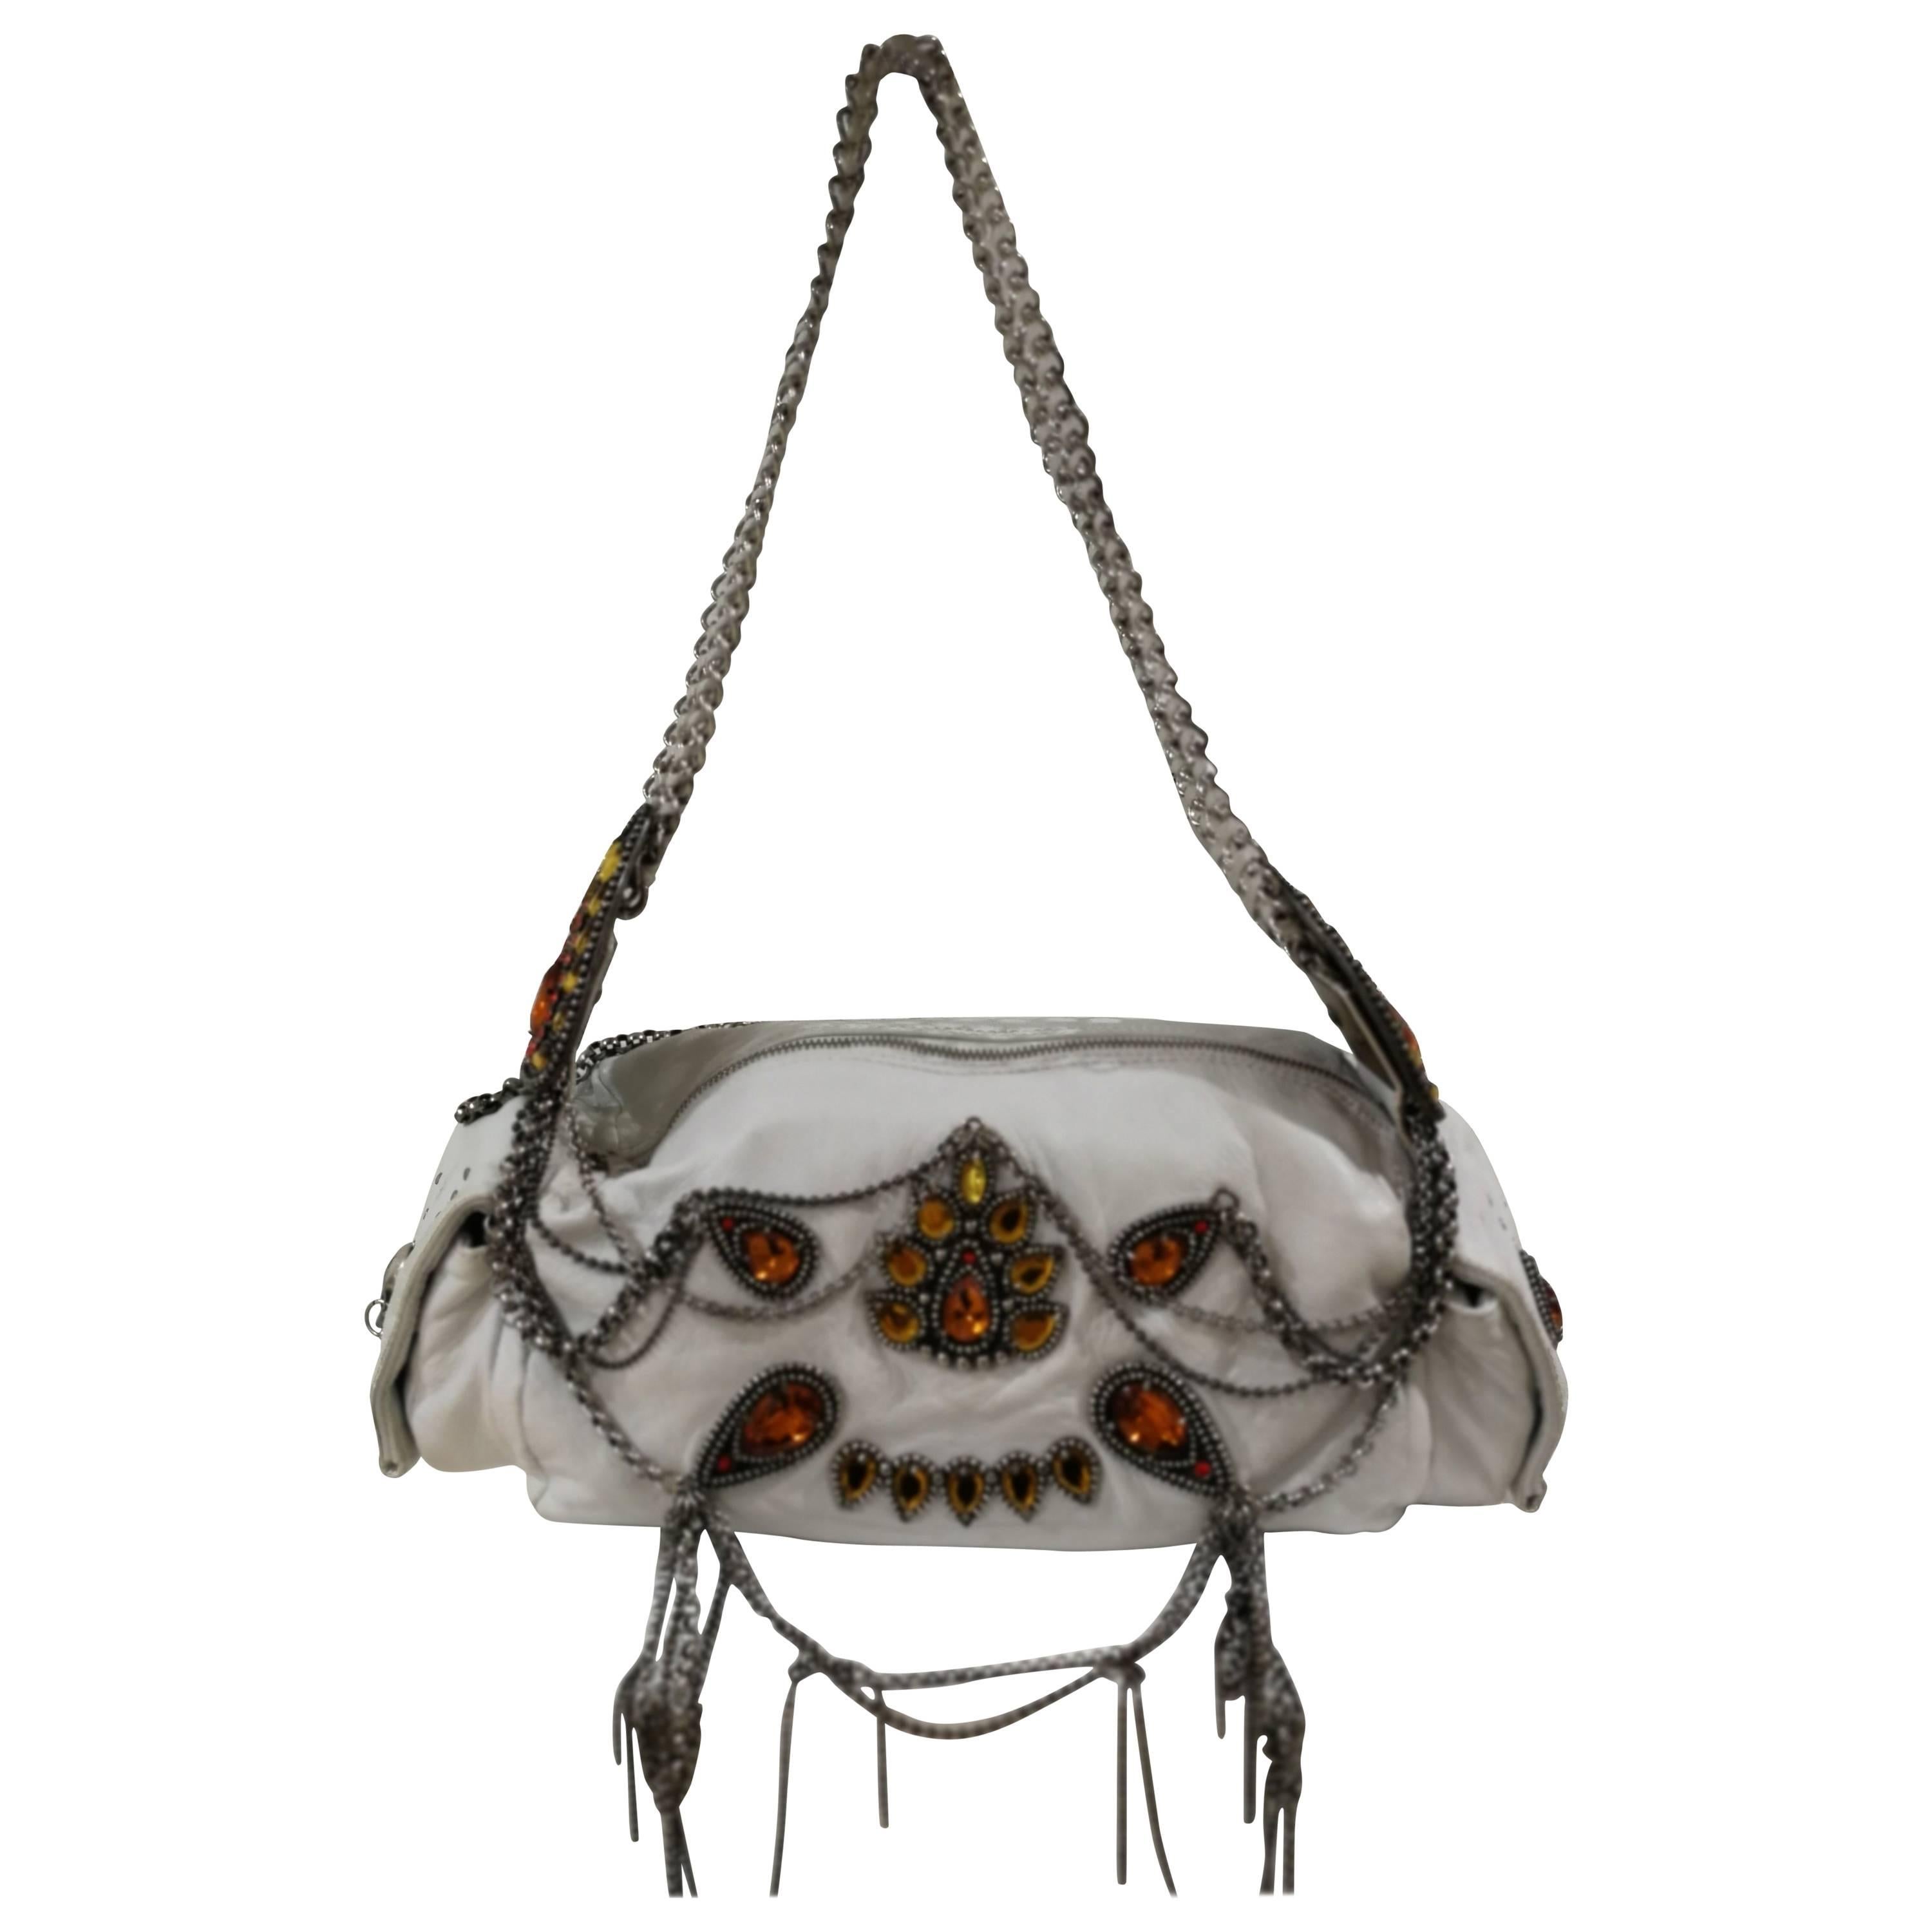 John Richmond white leather chains and swarovsky Shoulder Bag